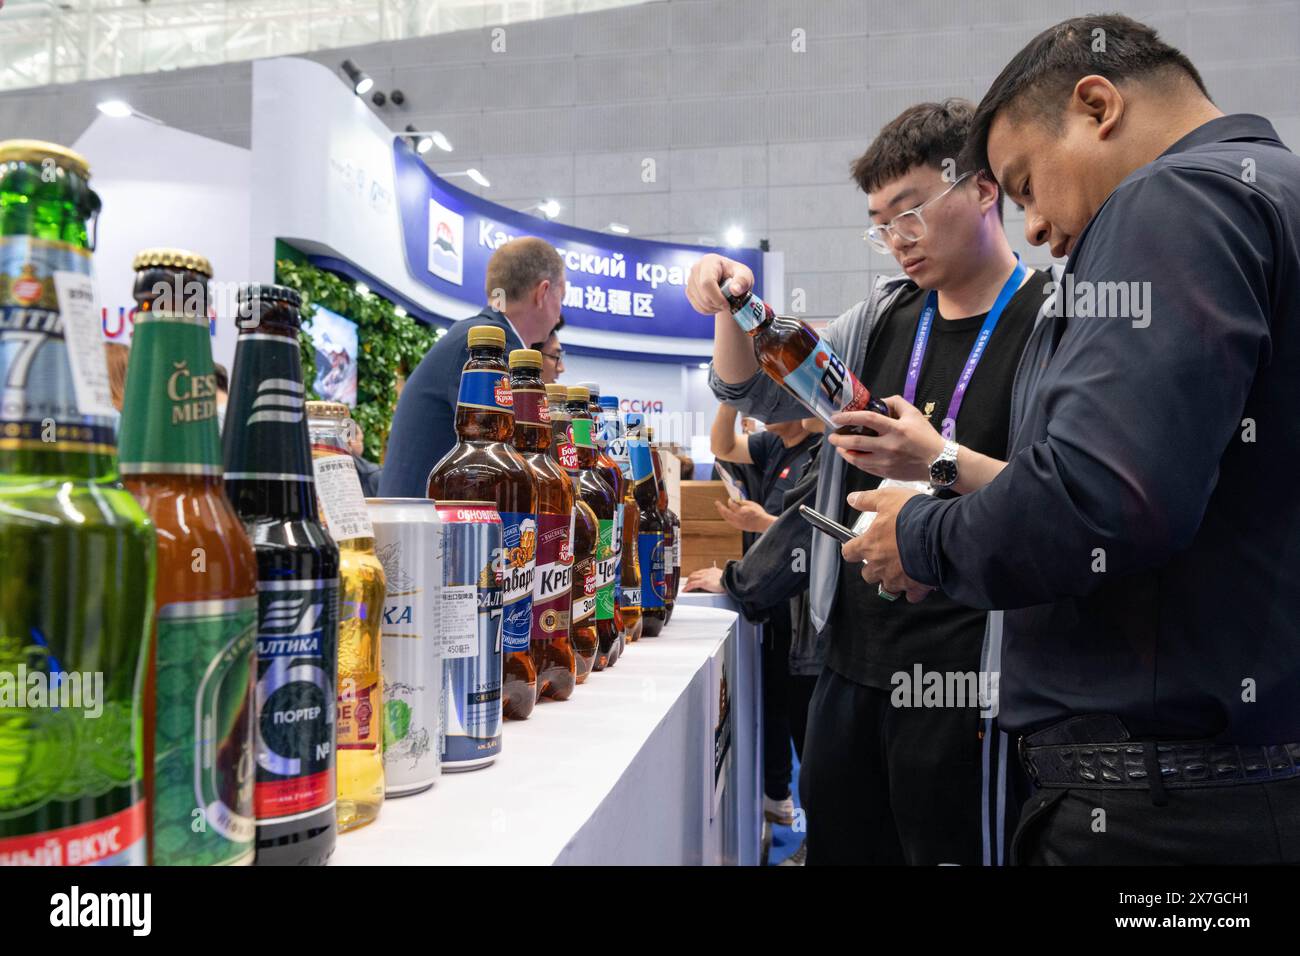 (240520) -- HARBIN, May 20, 2024 (Xinhua) -- Visitors buy beer from Russia during the eighth China-Russia Expo in Harbin, northeast China's Heilongjiang Province, May 20, 2024. Over 5,000 overseas buyers registered at the expo and representatives from 44 countries and regions participated in the expo. The exhibition area spans 388,000 square meters, showcasing more than 5,000 products in over 20 major categories from 10 sectors.  Held from May 16 to 21, the expo is also a gustatory feast where visitors can taste a wide array of food and beverages. (Xinhua/Xie Jianfei) Stock Photo